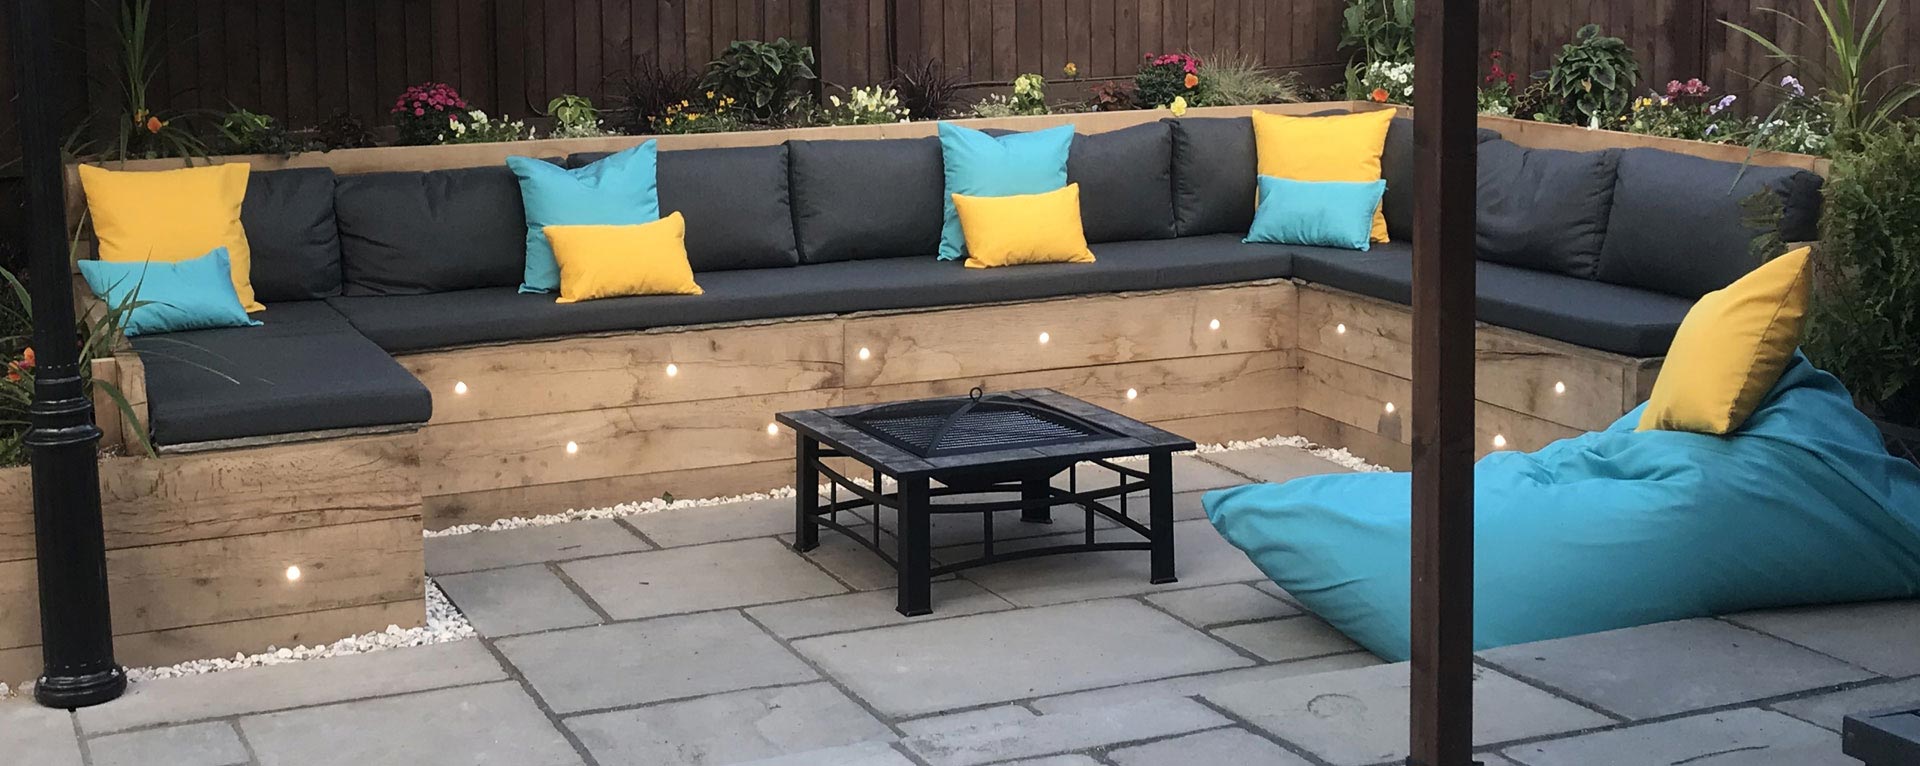 Bespoke Outdoor Cushions for garden and patio furniture